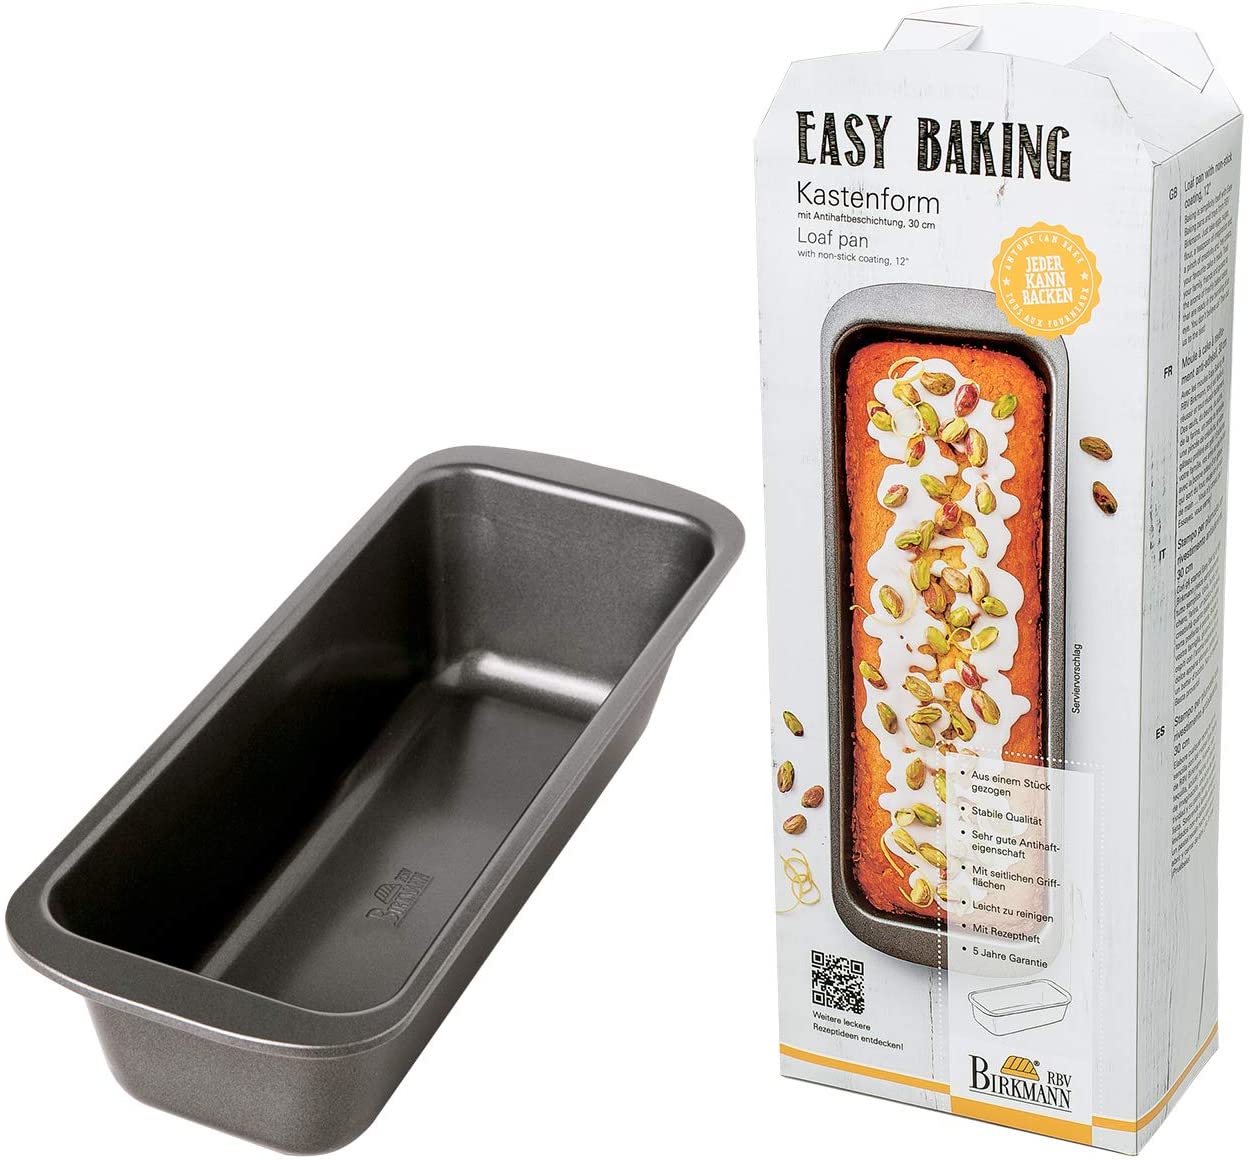 Baking Moulds from the Easy Baking Range by RBV Birkmann, grey, 30 cm